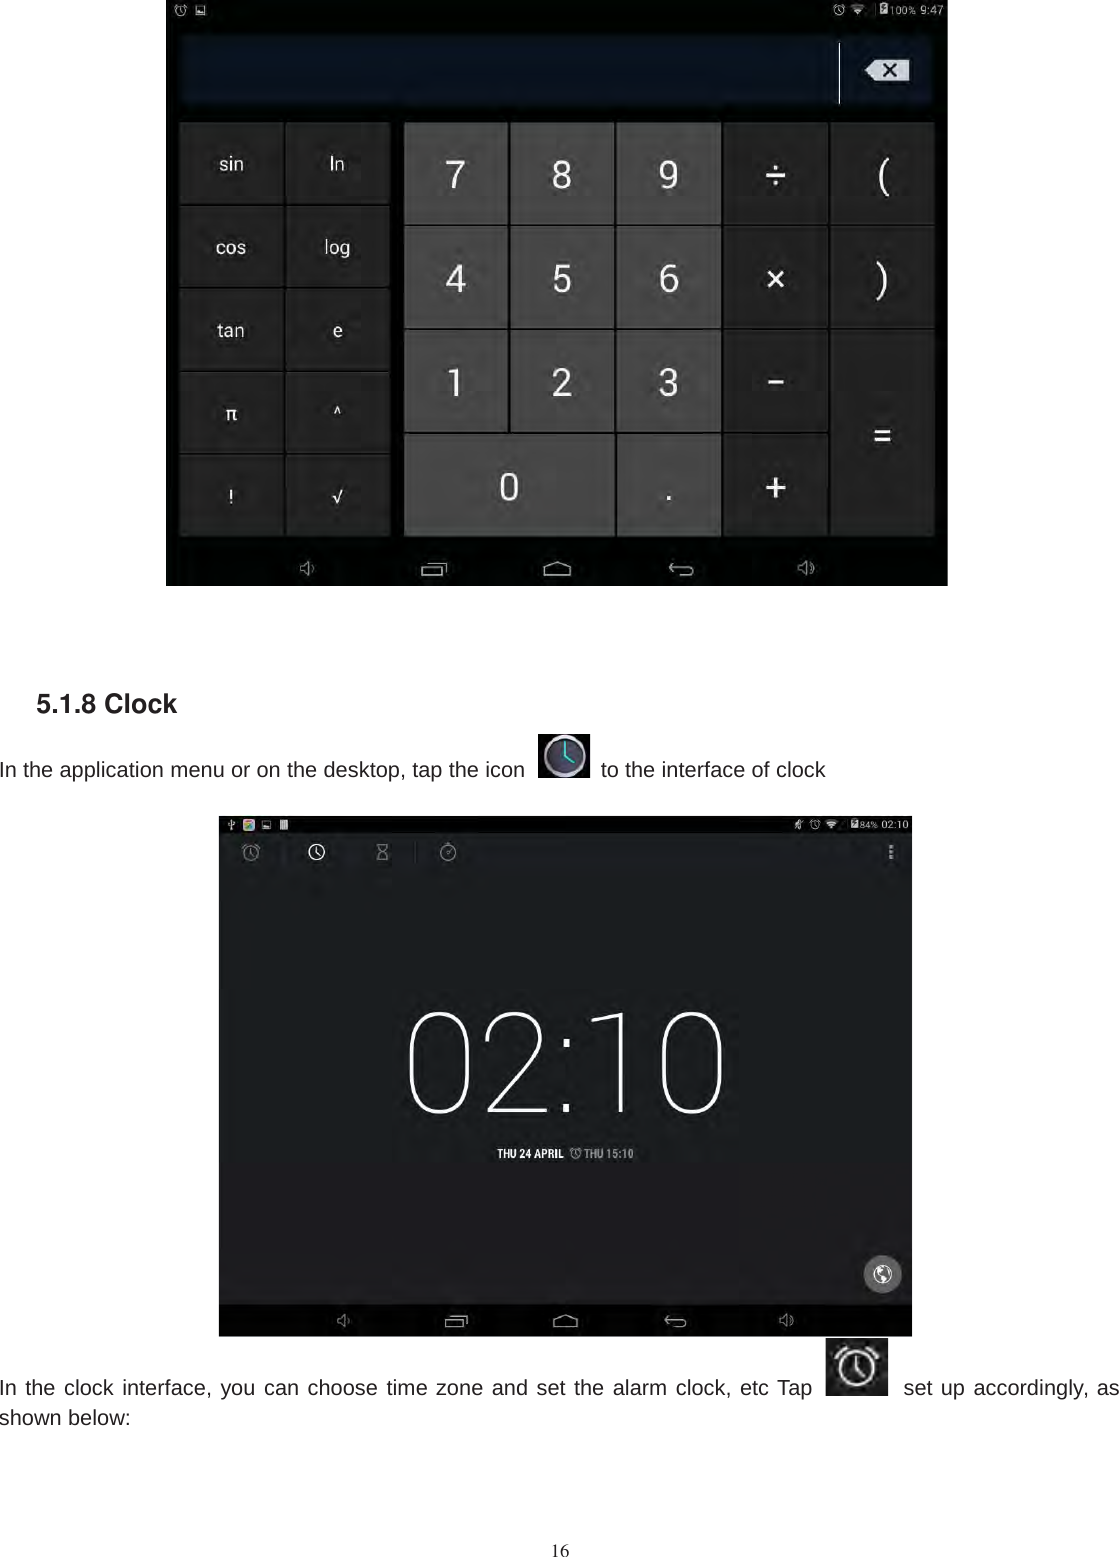 165.1.8 ClockIn the application menu or on the desktop, tap the icon to the interface of clockIn the clock interface, you can choose time zone and set the alarm clock, etc Tap set up accordingly, asshown below: